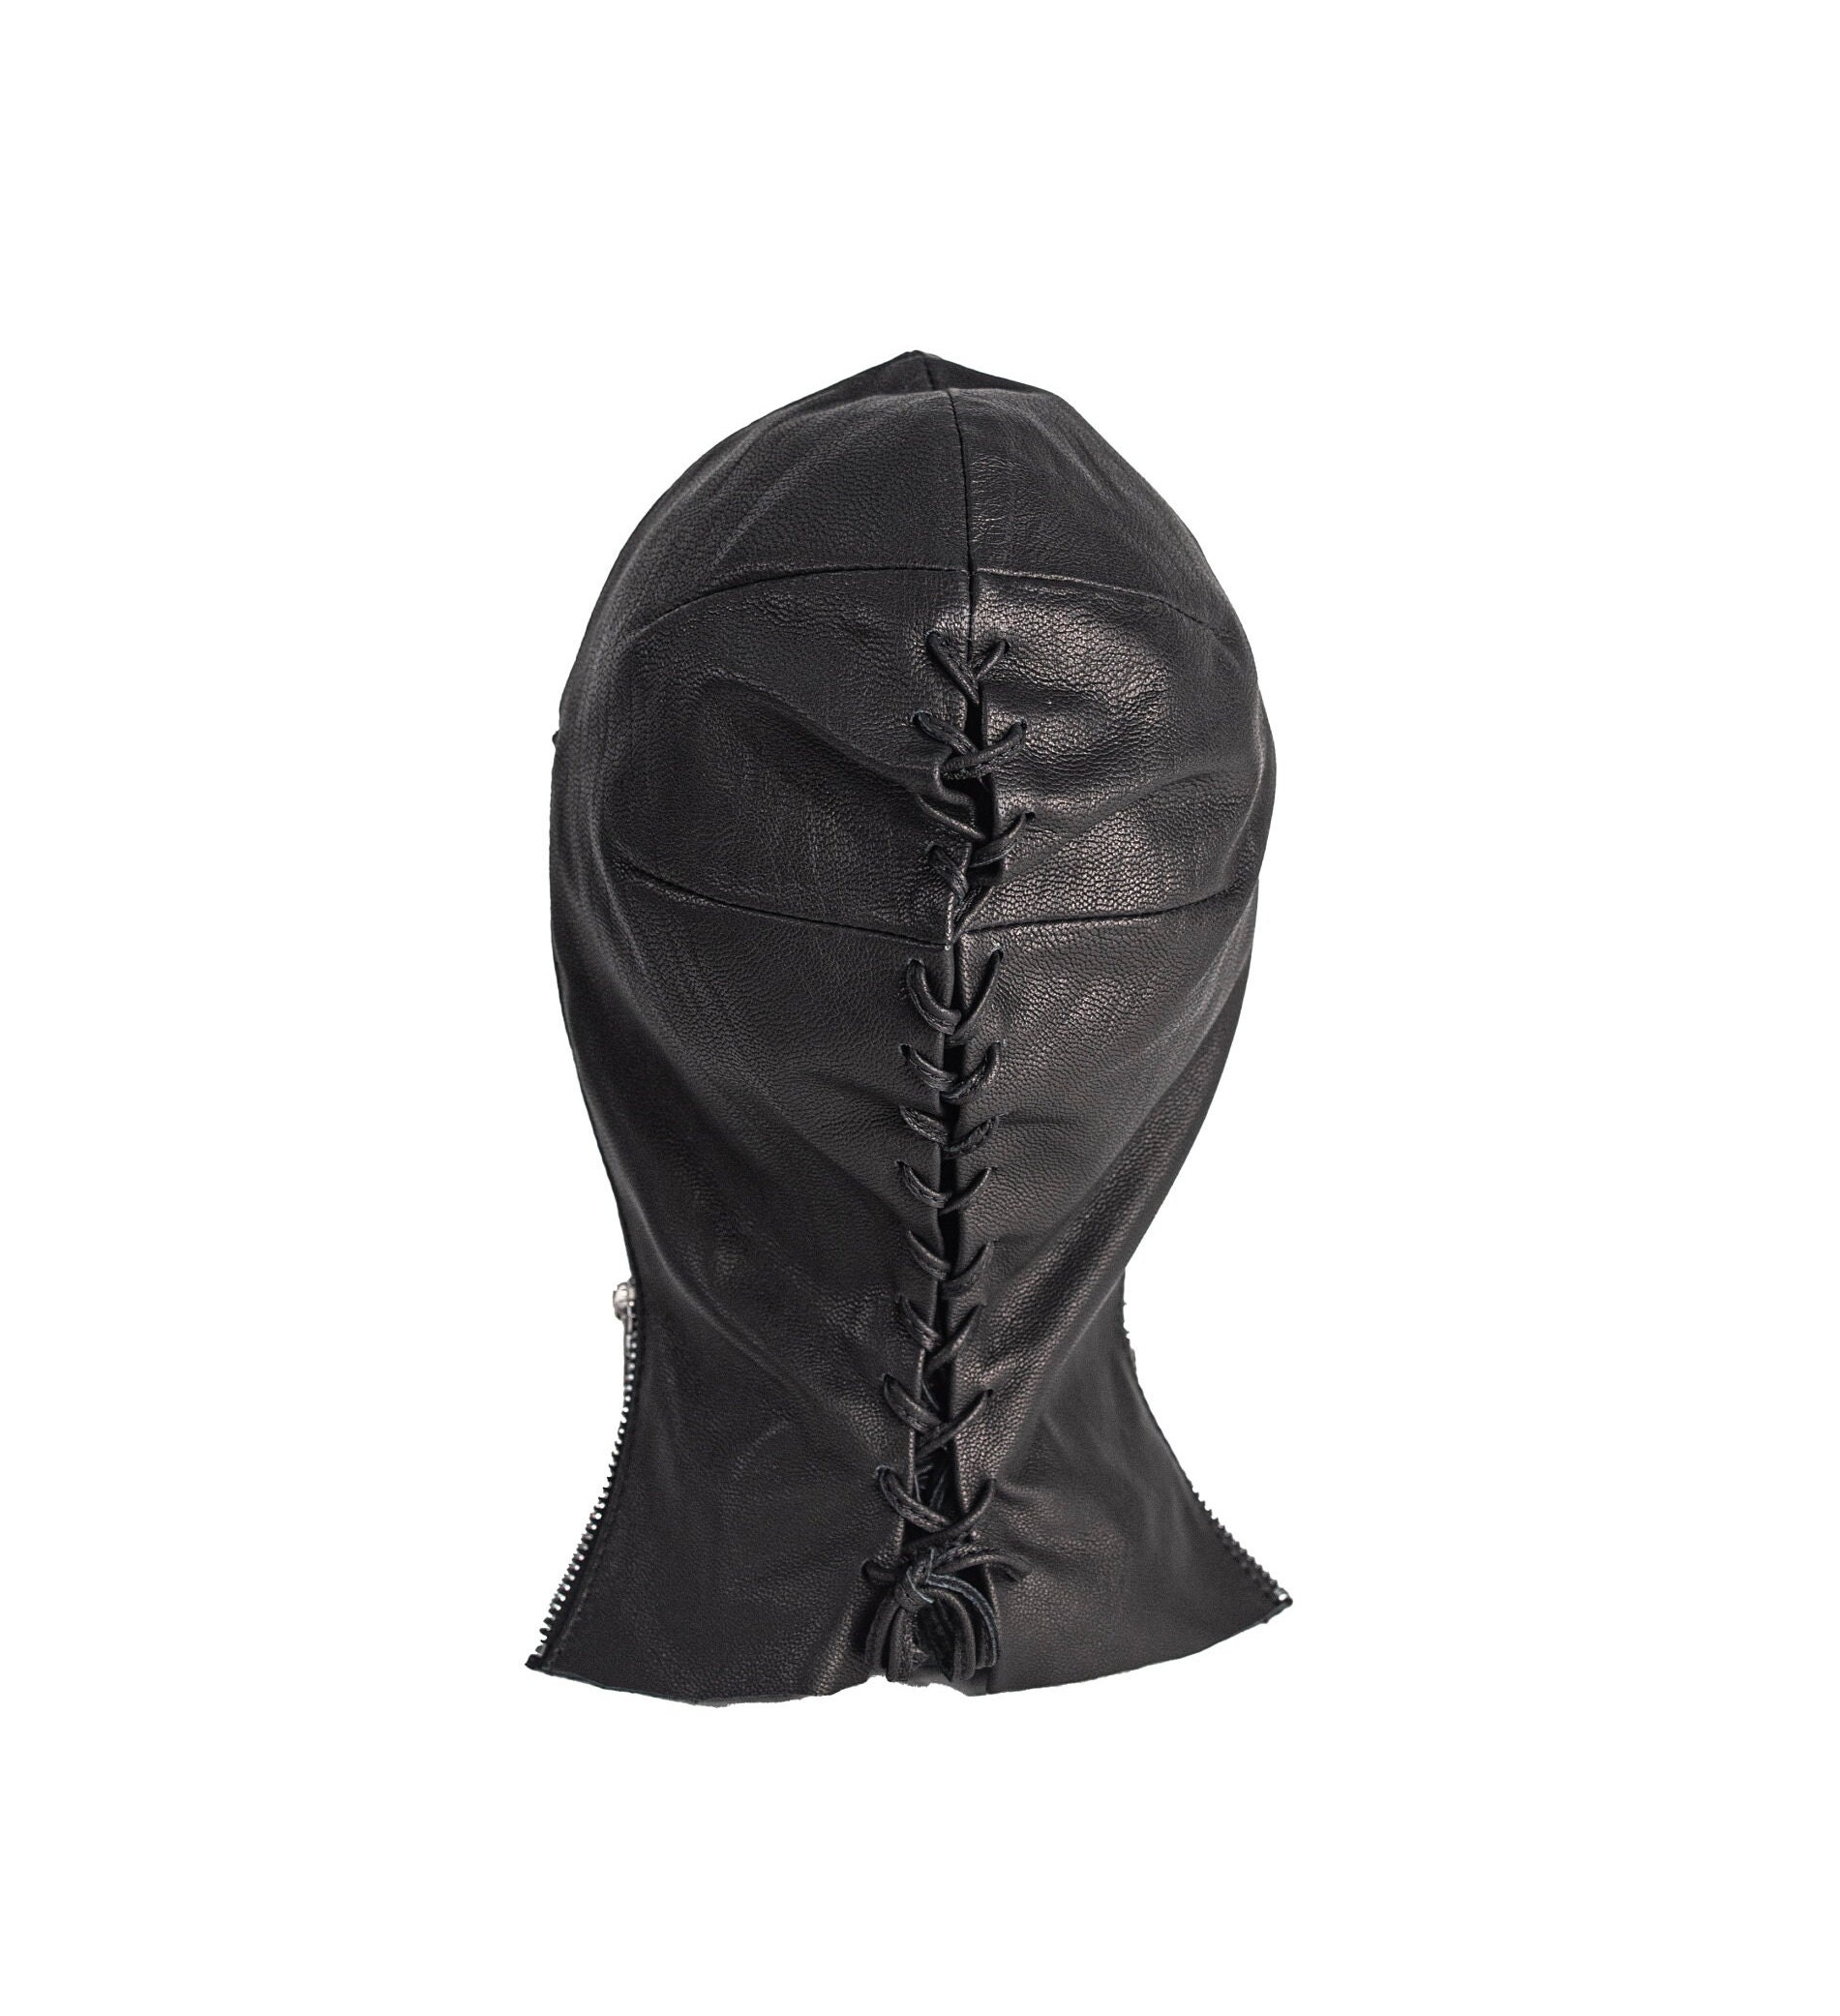 INCOGNITO Black Leather Lace Up Mask